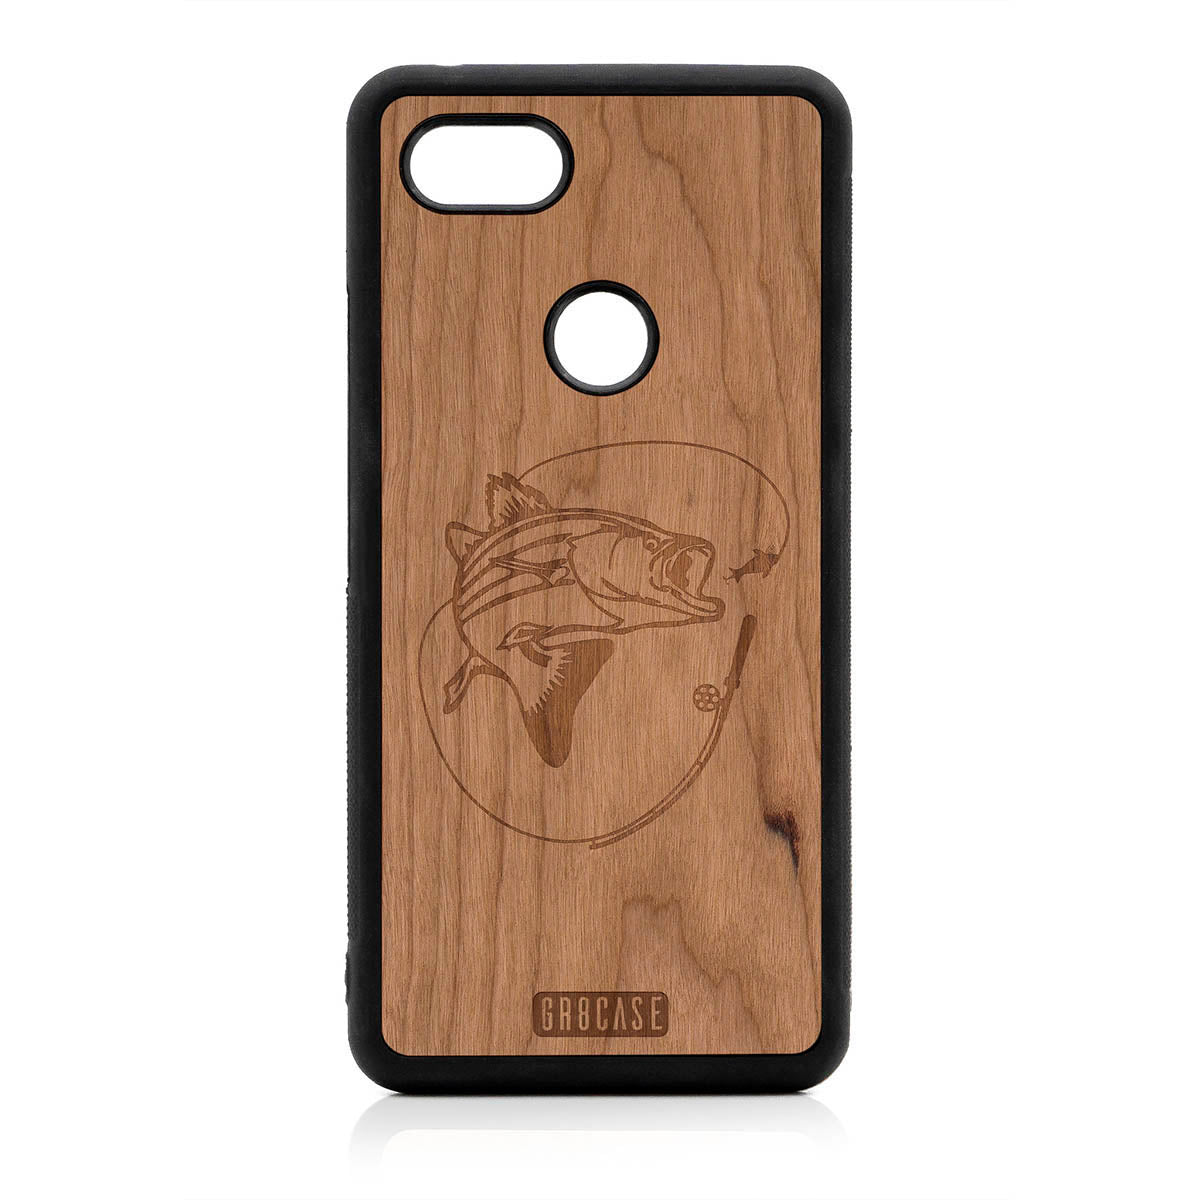 Fish and Reel Design Wood Case For Google Pixel 3 XL by GR8CASE